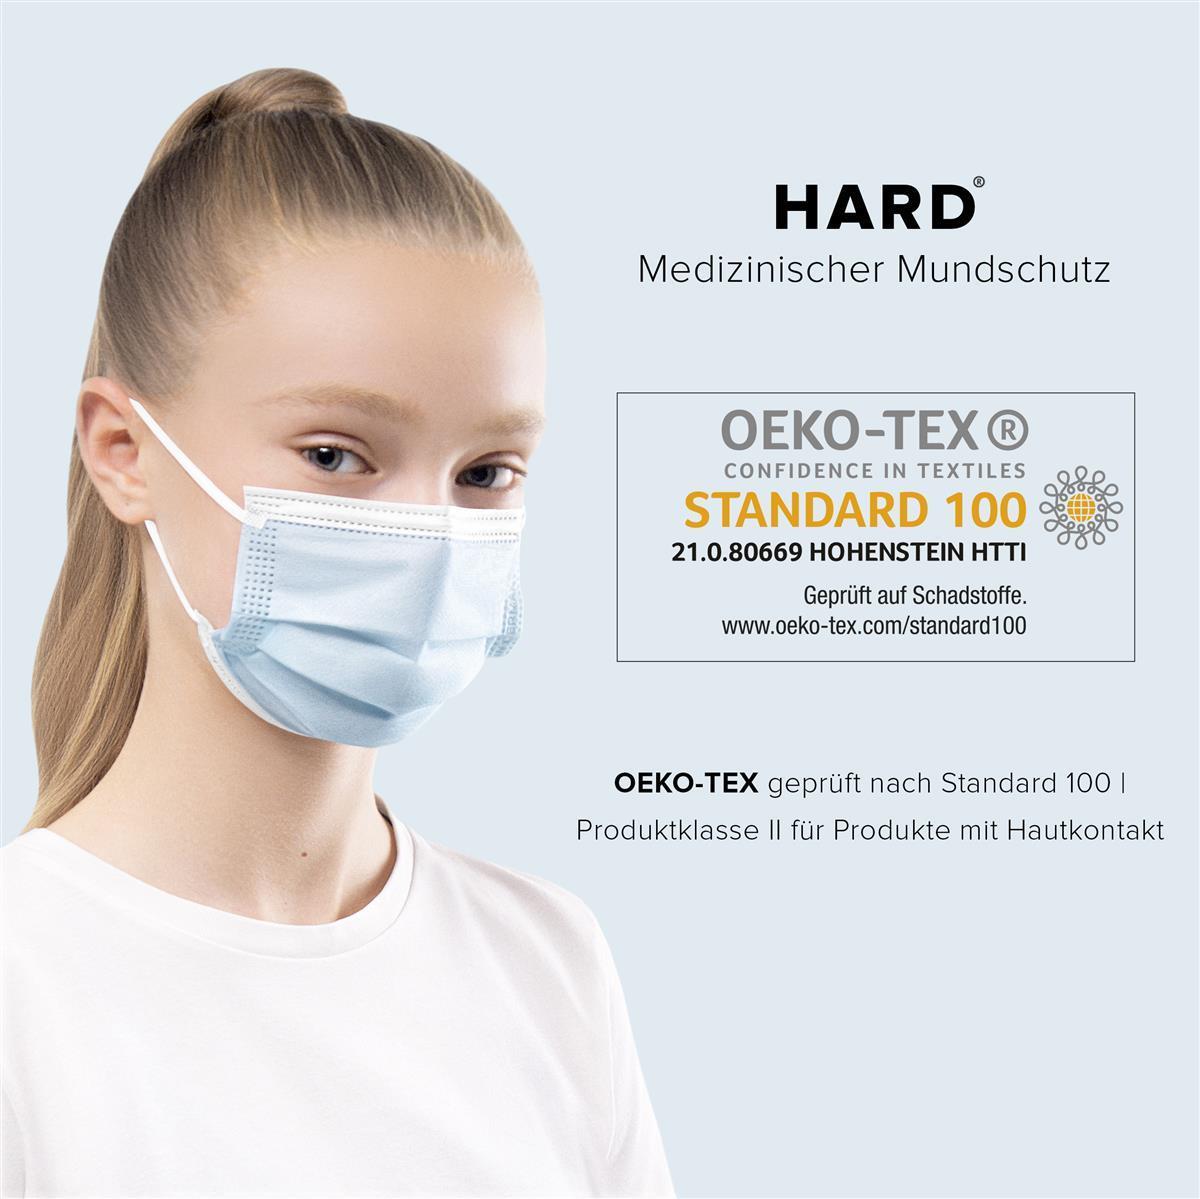 50X HARD® MEDICAL FACE MASK FOR CHILDREN
SURGICAL MASK TYPE IIR
IN SMALL SIZE XS
STANDARD 100 BY OEKO-TEX
MADE IN GERMANY
NOT INDIVIDUALLY PACKAGED